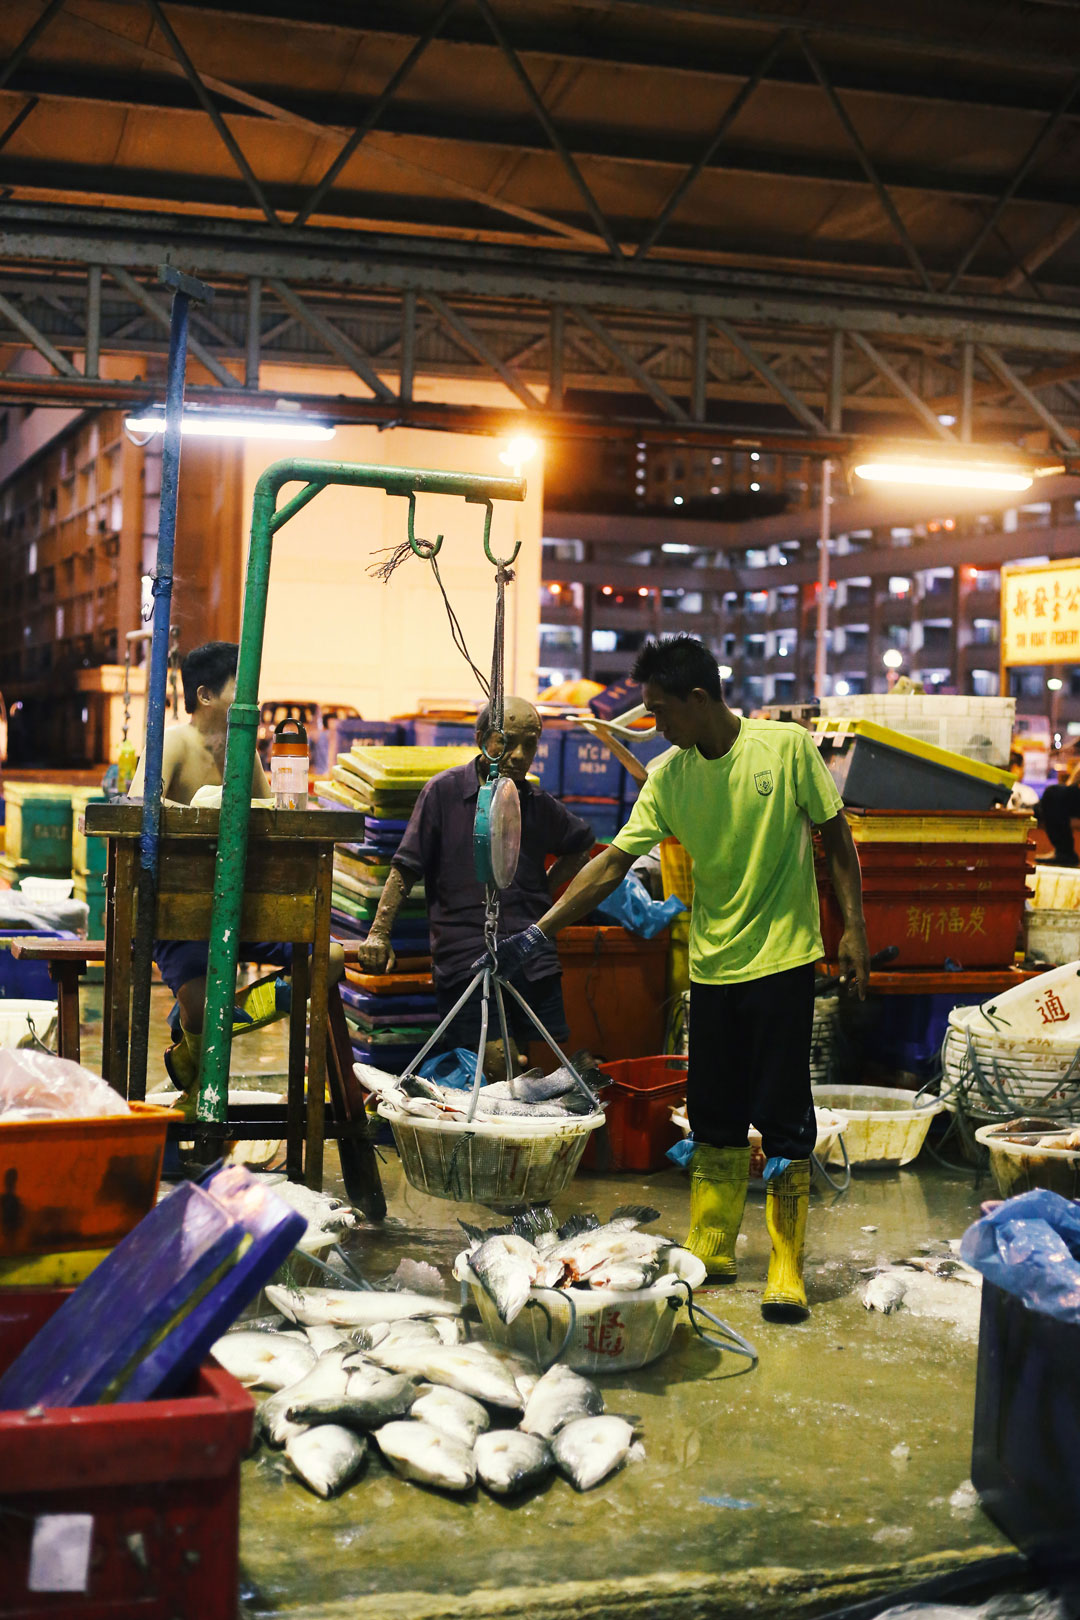 While Singapore Sleeps: 4:15am at Jurong Fishery Port - RICE